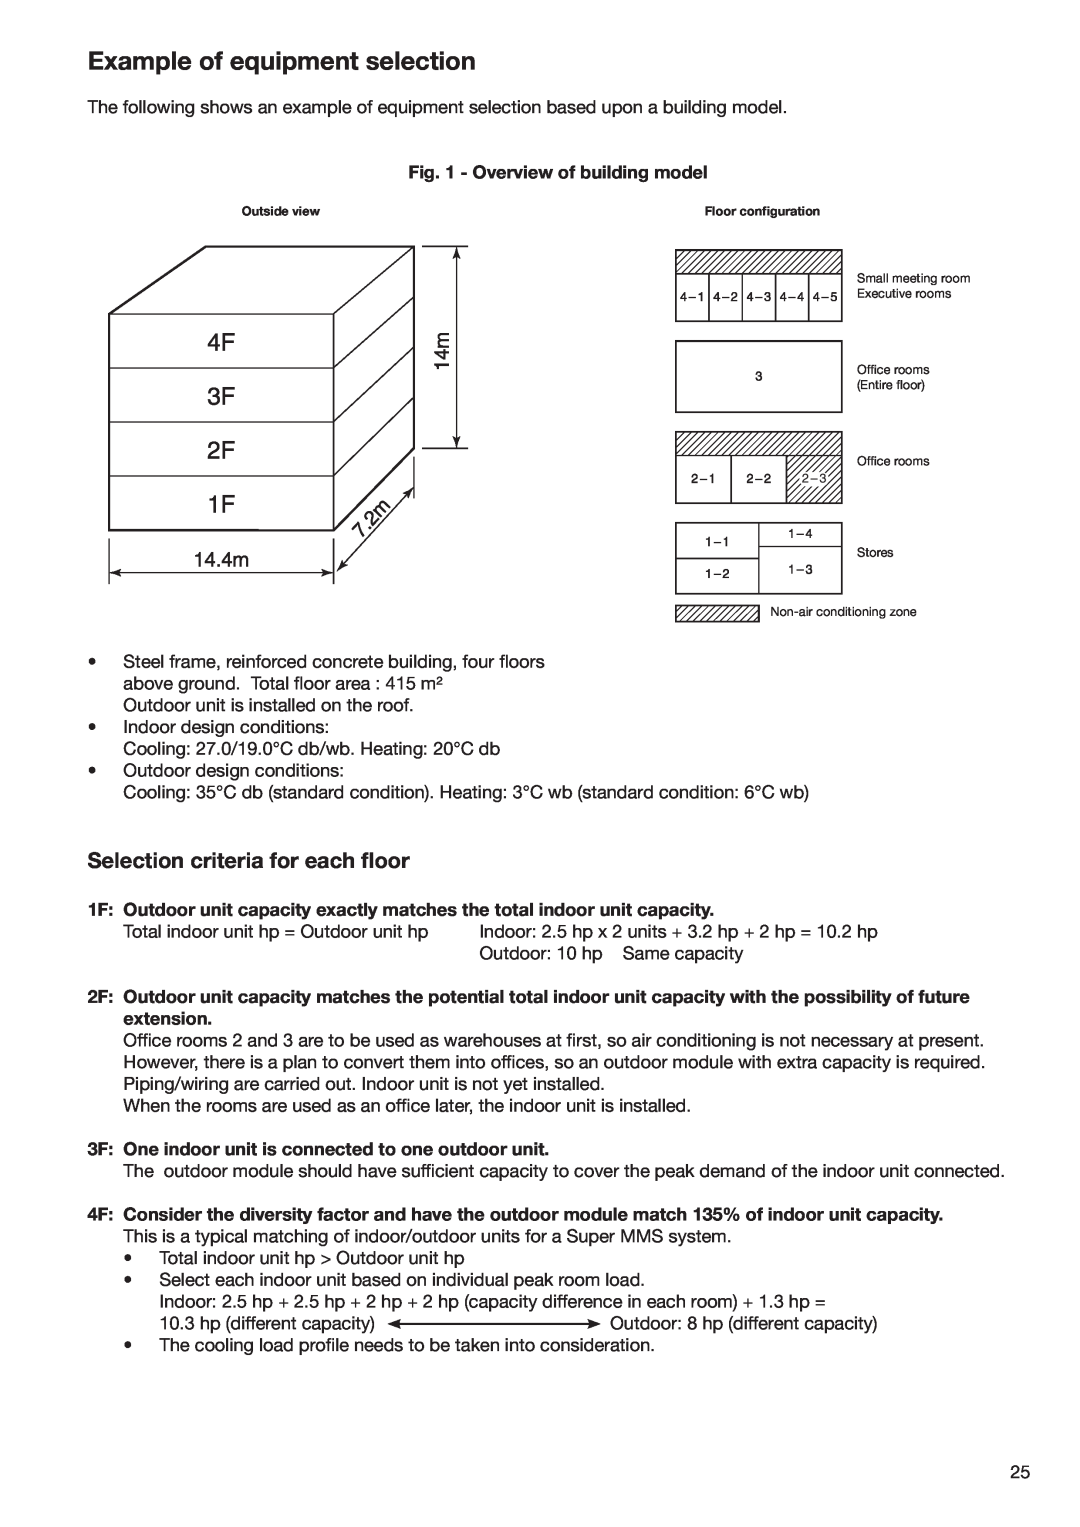 Toshiba HFC R-410A manual Example of equipment selection, Selection criteria for each ﬂoor 